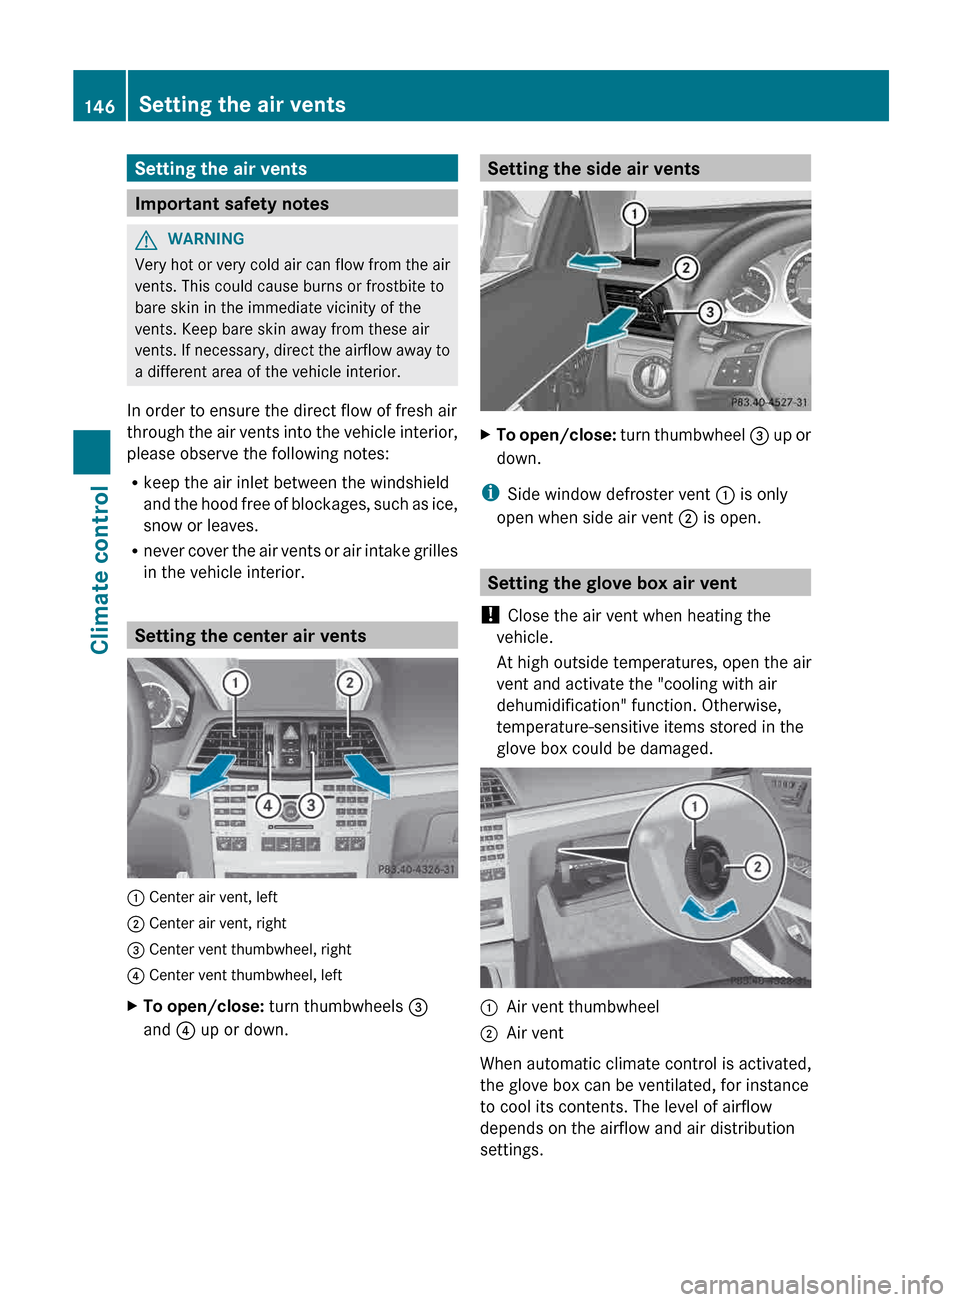 MERCEDES-BENZ E-Class CABRIOLET 2013 C207 User Guide Setting the air vents
Important safety notes
G
WARNING
Very hot or very cold air can flow from the air
vents. This could cause burns or frostbite to
bare skin in the immediate vicinity of the
vents. K